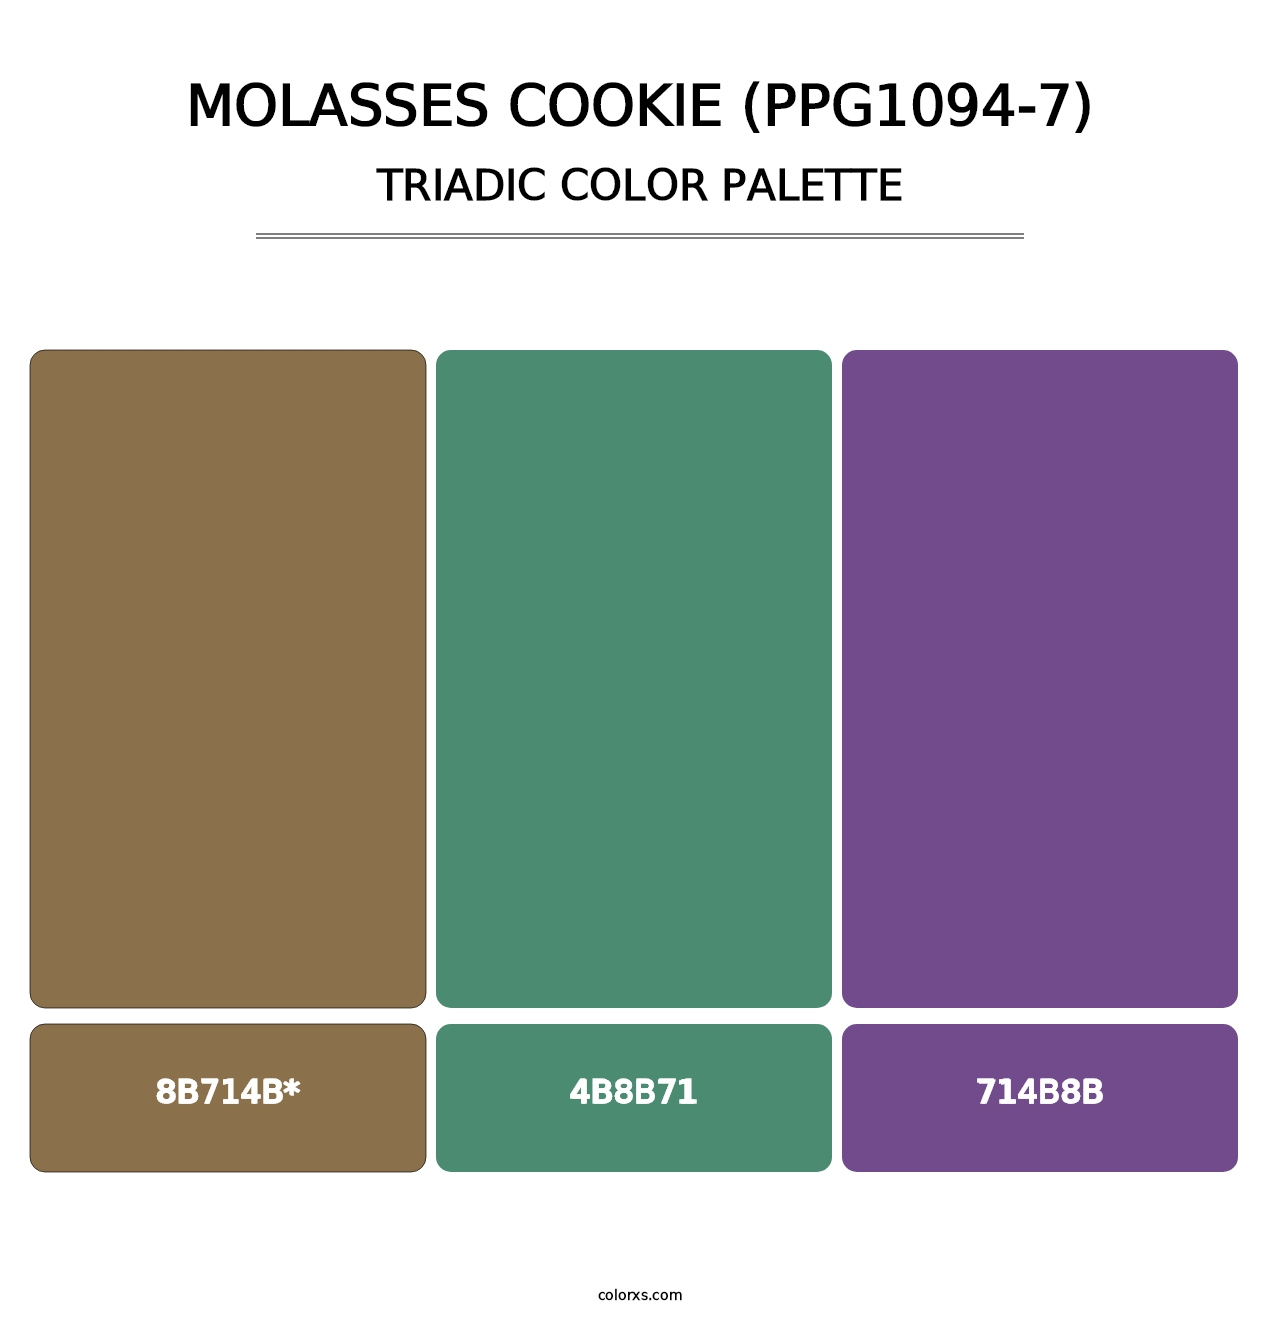 Molasses Cookie (PPG1094-7) - Triadic Color Palette